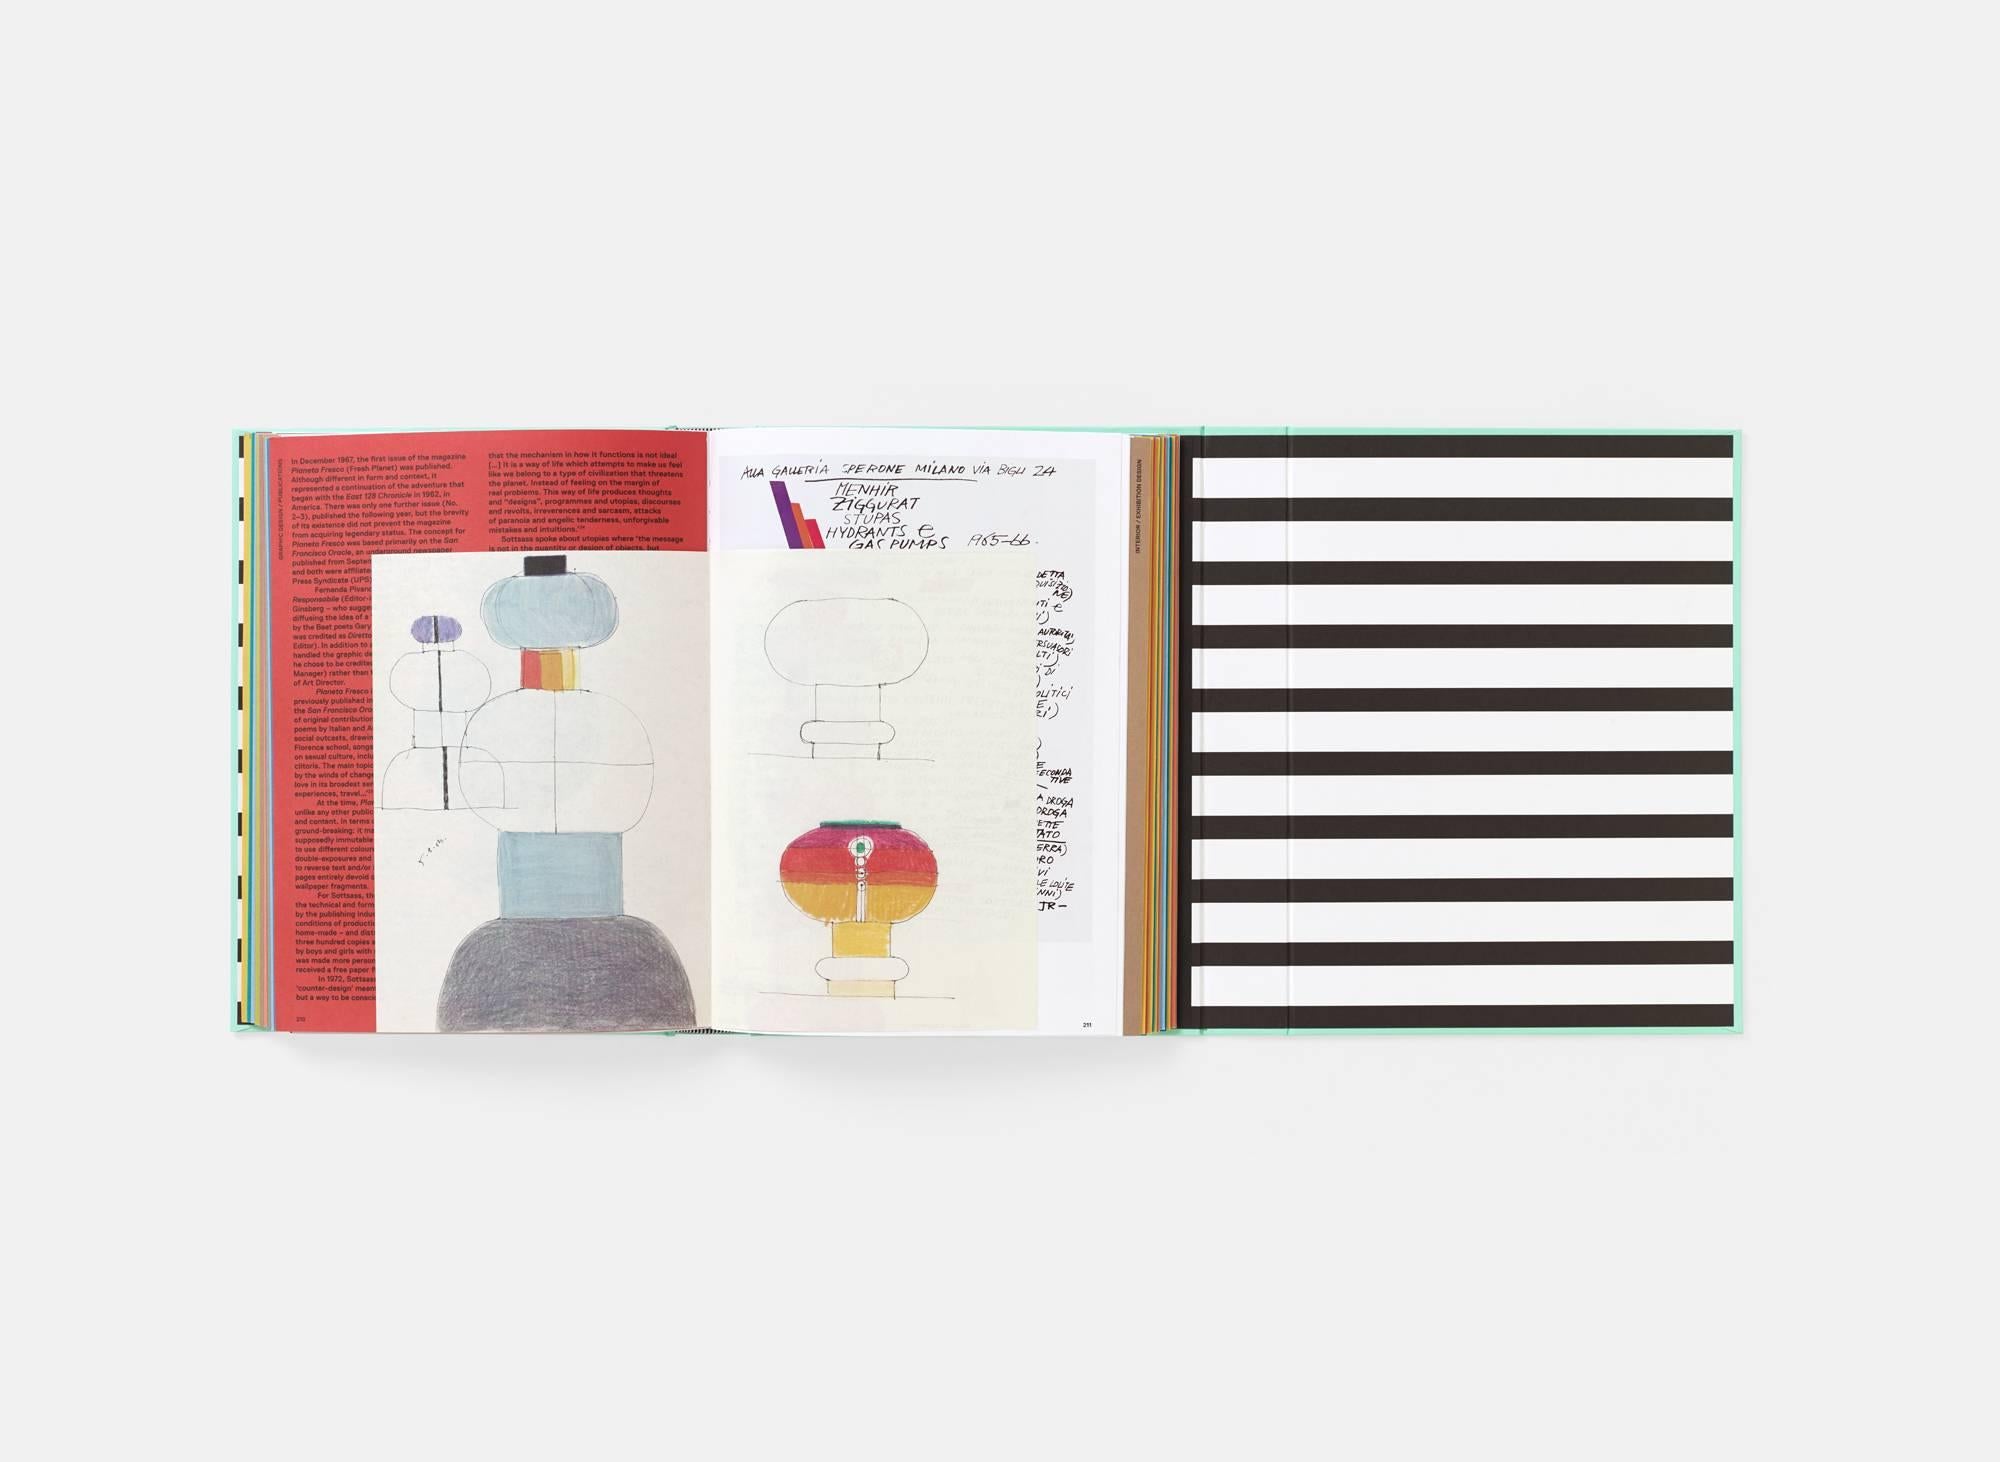 Richly illustrated with never-before-published biographical photographs from the Sottsass archives, the book includes a section showcasing the best of his countless drawings and sketches. 

Perhaps best known as the founder of the Memphis Group in